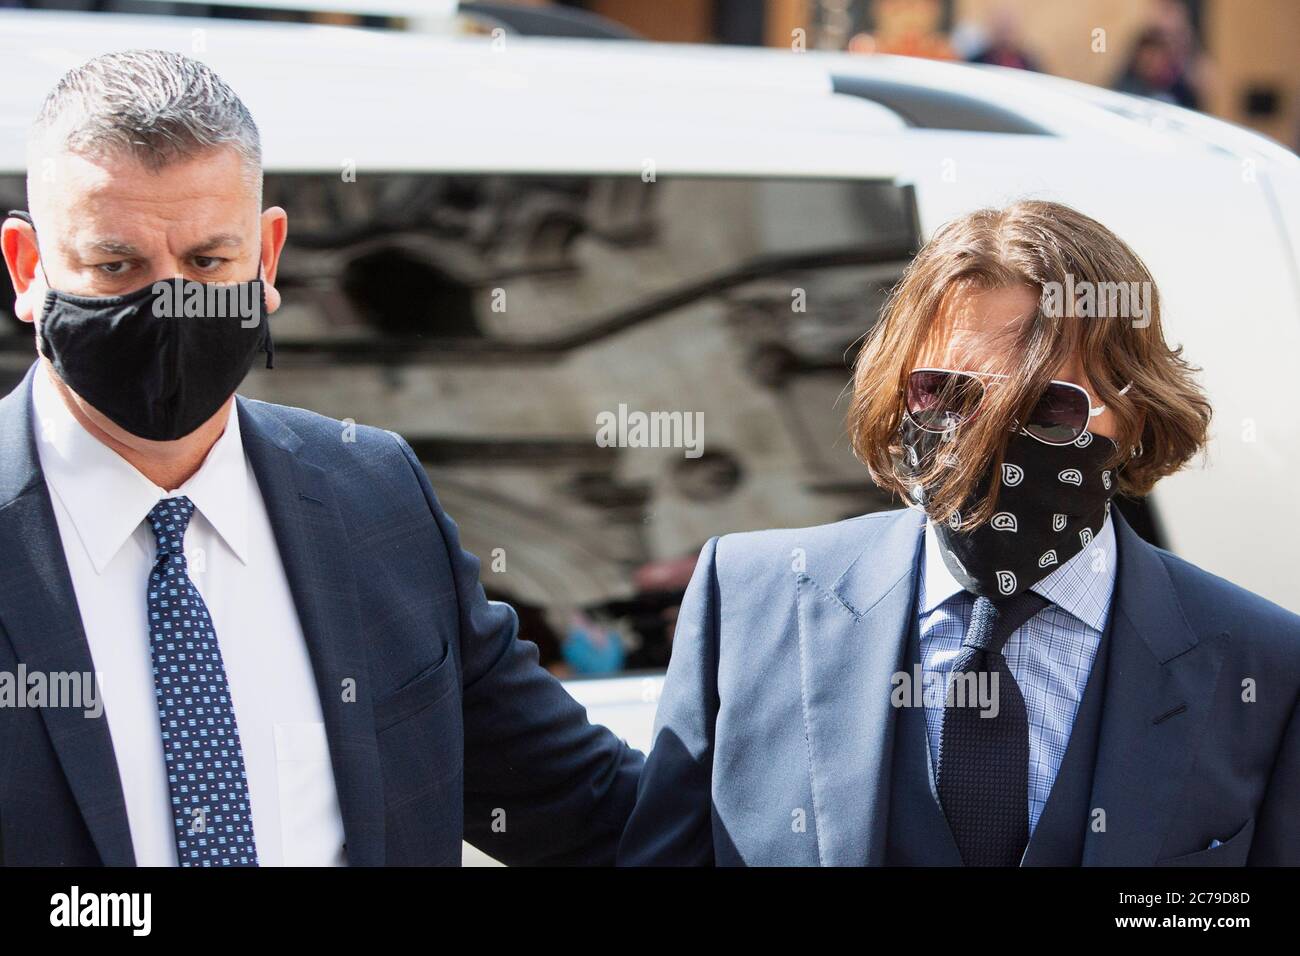 Actor Johnny Depp arrives at London's Royal Courts of Justice Stock Photo